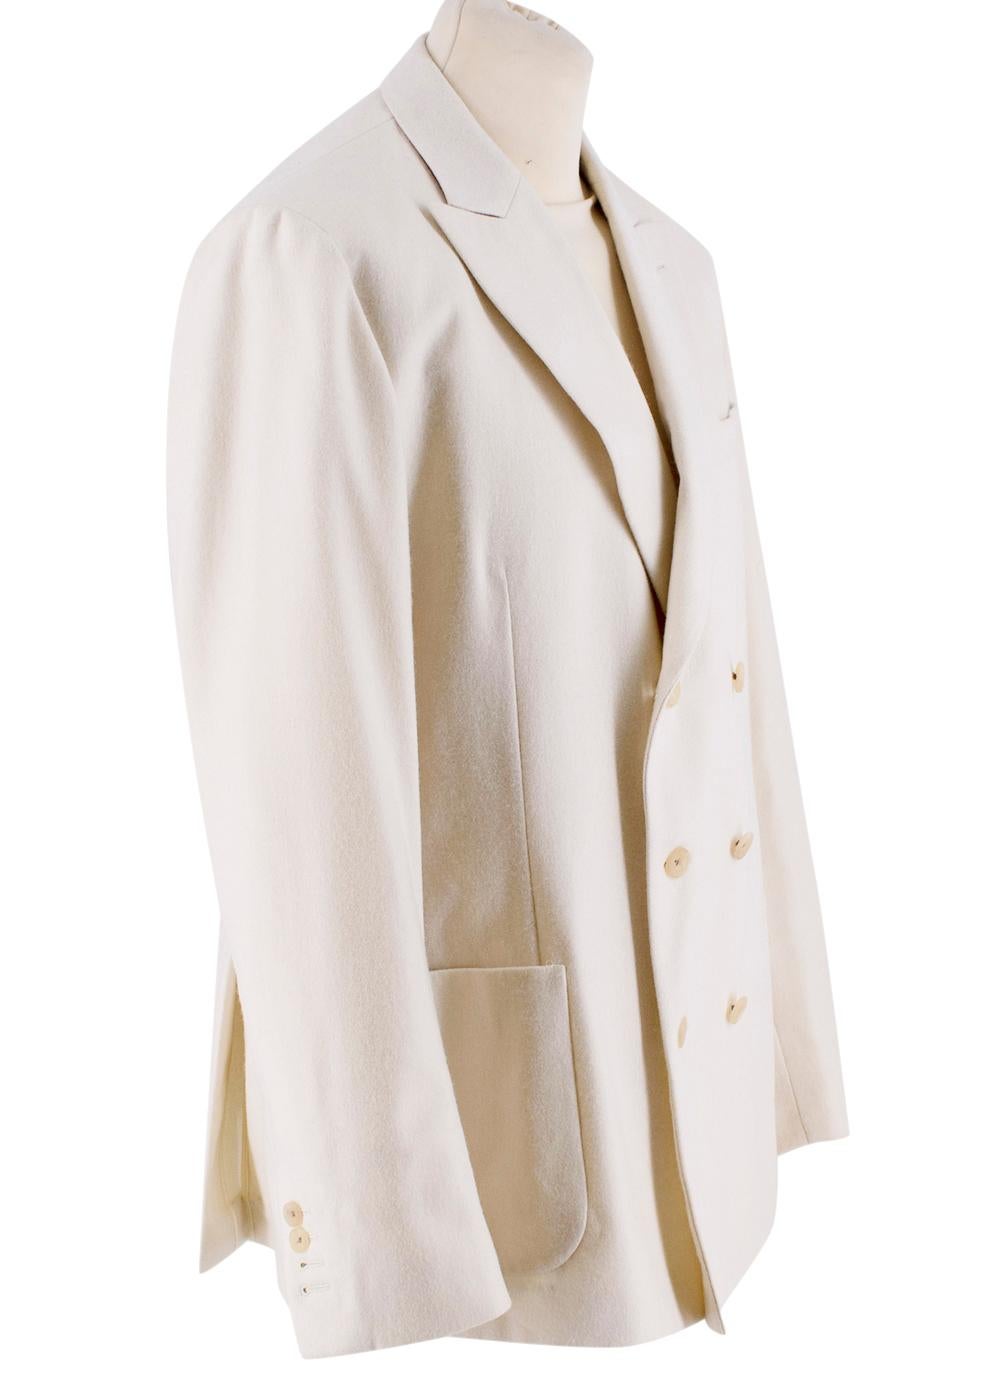 New & Lingwood Ivory Wool Double Breasted Blazer 

-Classic style 
-Fine Cloth by Fox Brothers & Co, made in the west of England  
-Partially lined 
-3 functional outer pockets 
-2 inner pockets with contrasting lining
-Red felt lining under the